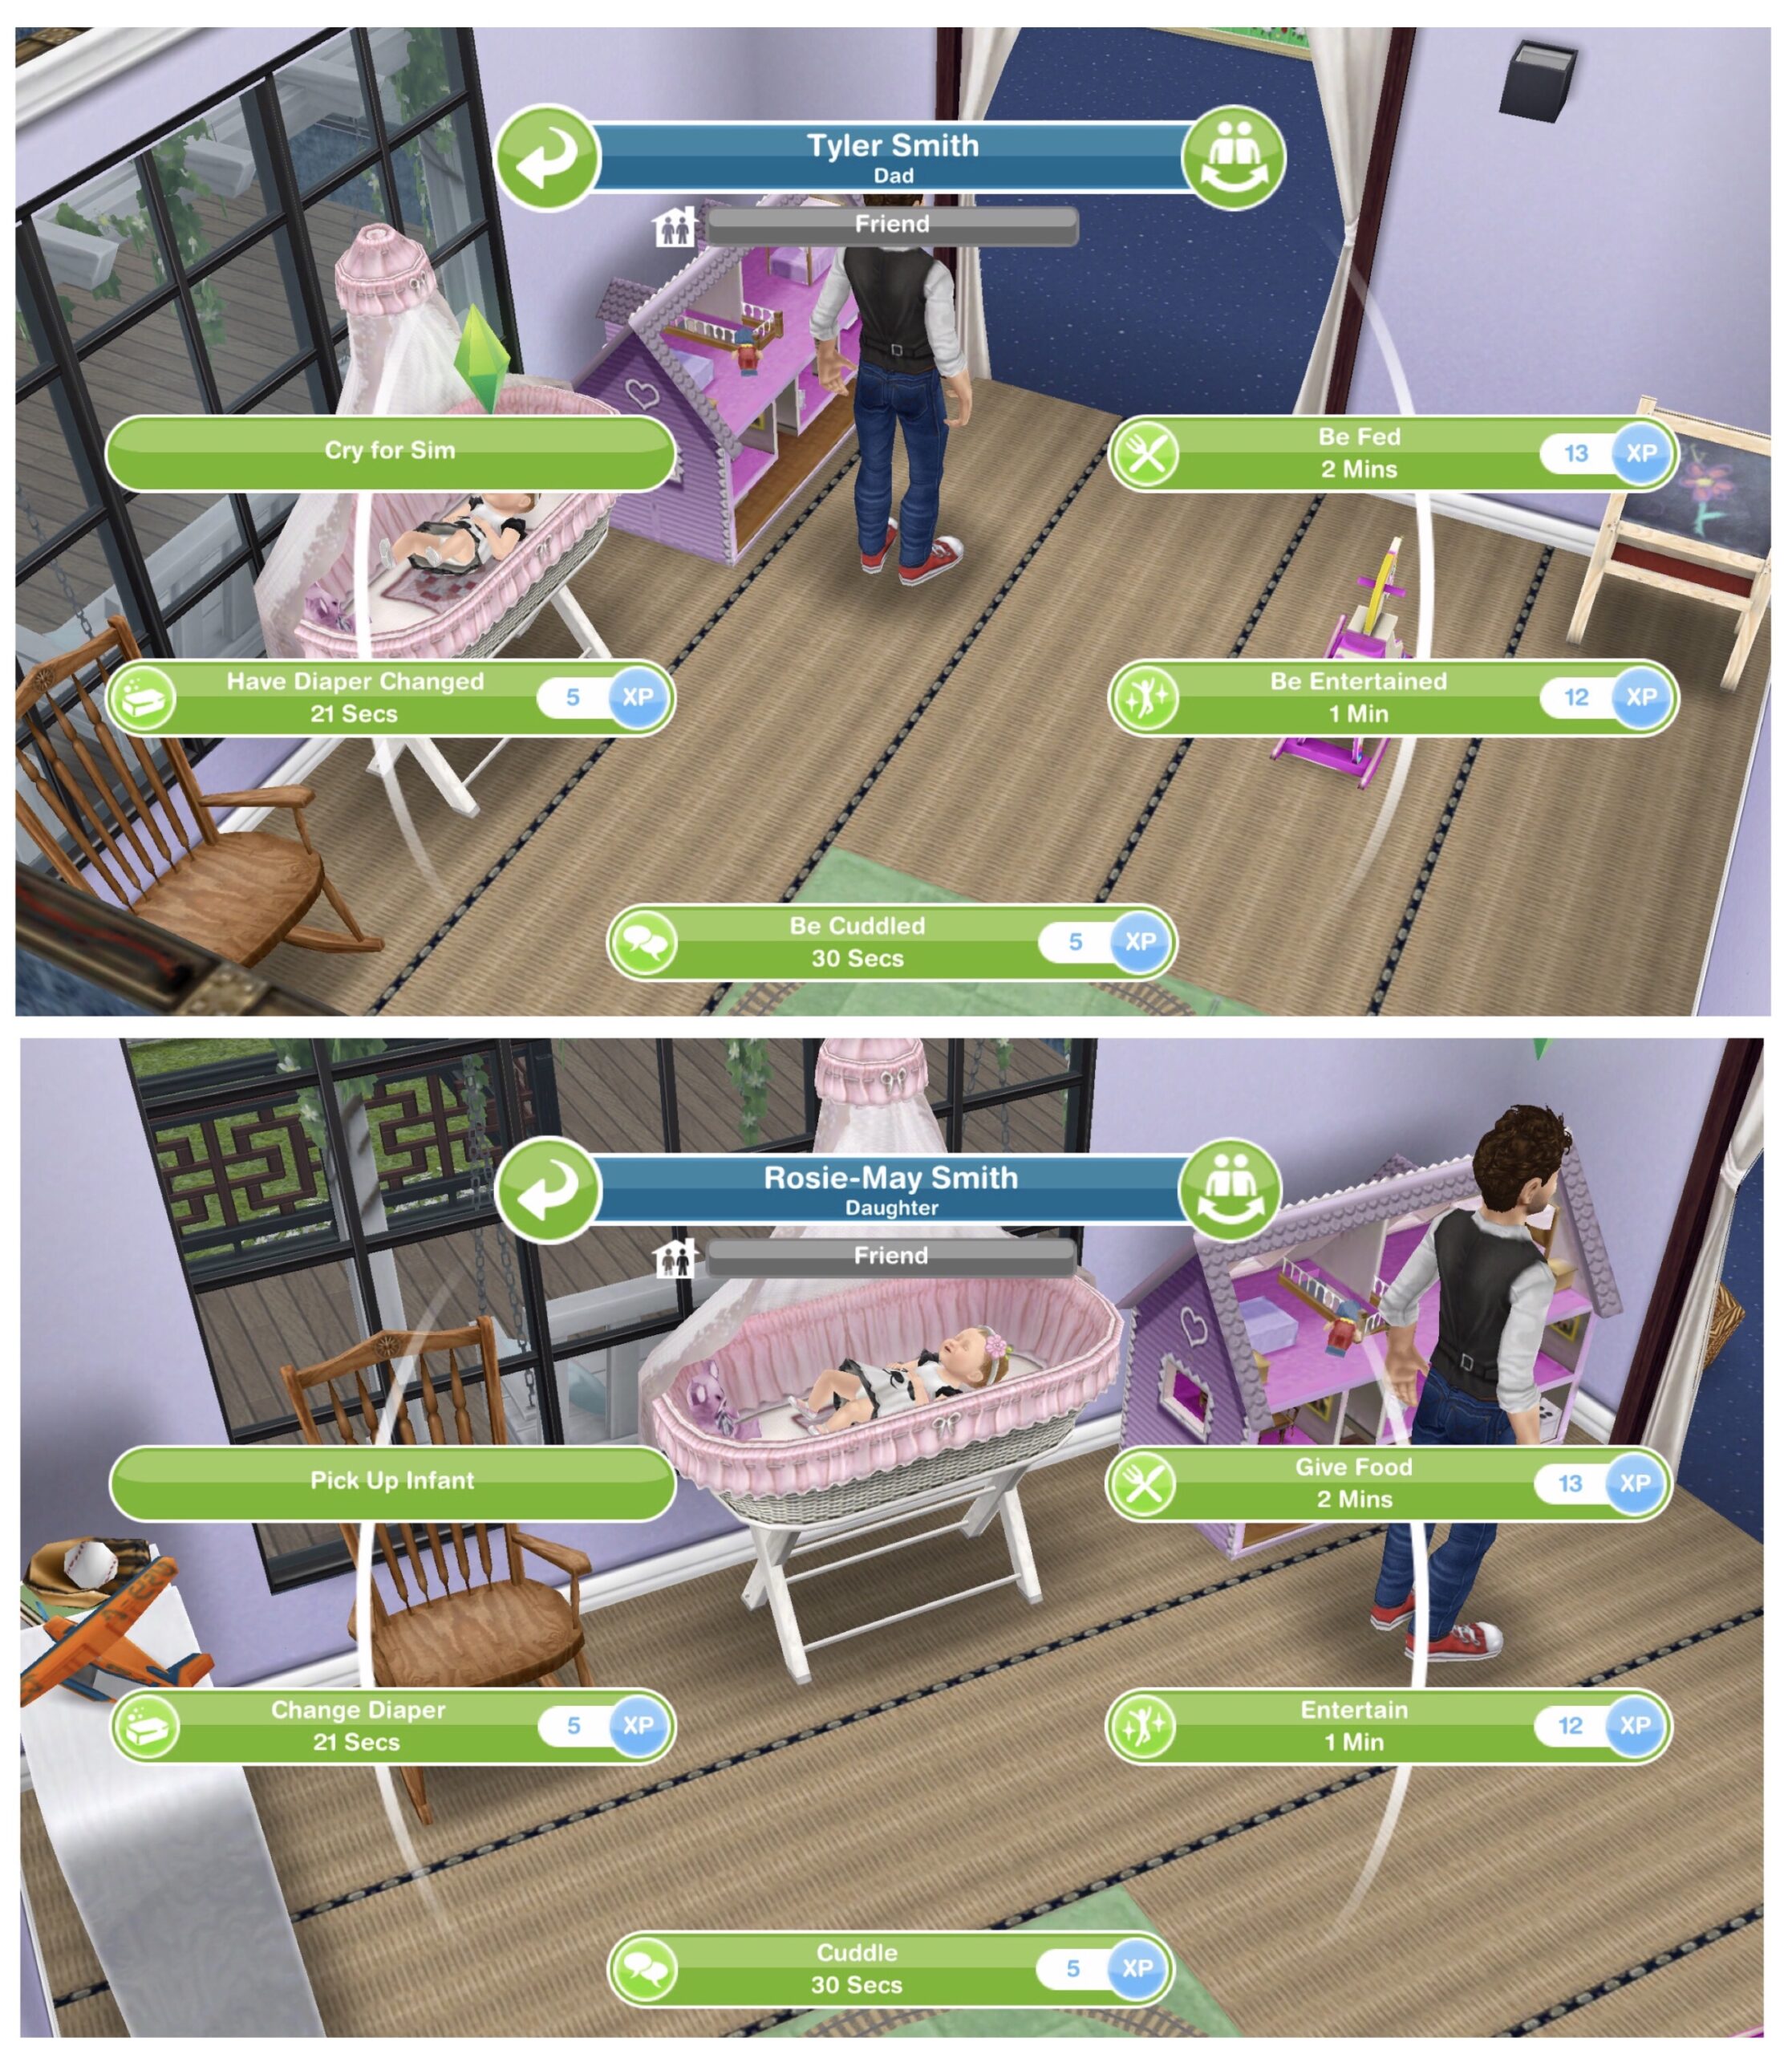 how to fill up toilet for baby in sims freeplay De sims freeplay: trouwen en baby’s trailer – sims nieuws